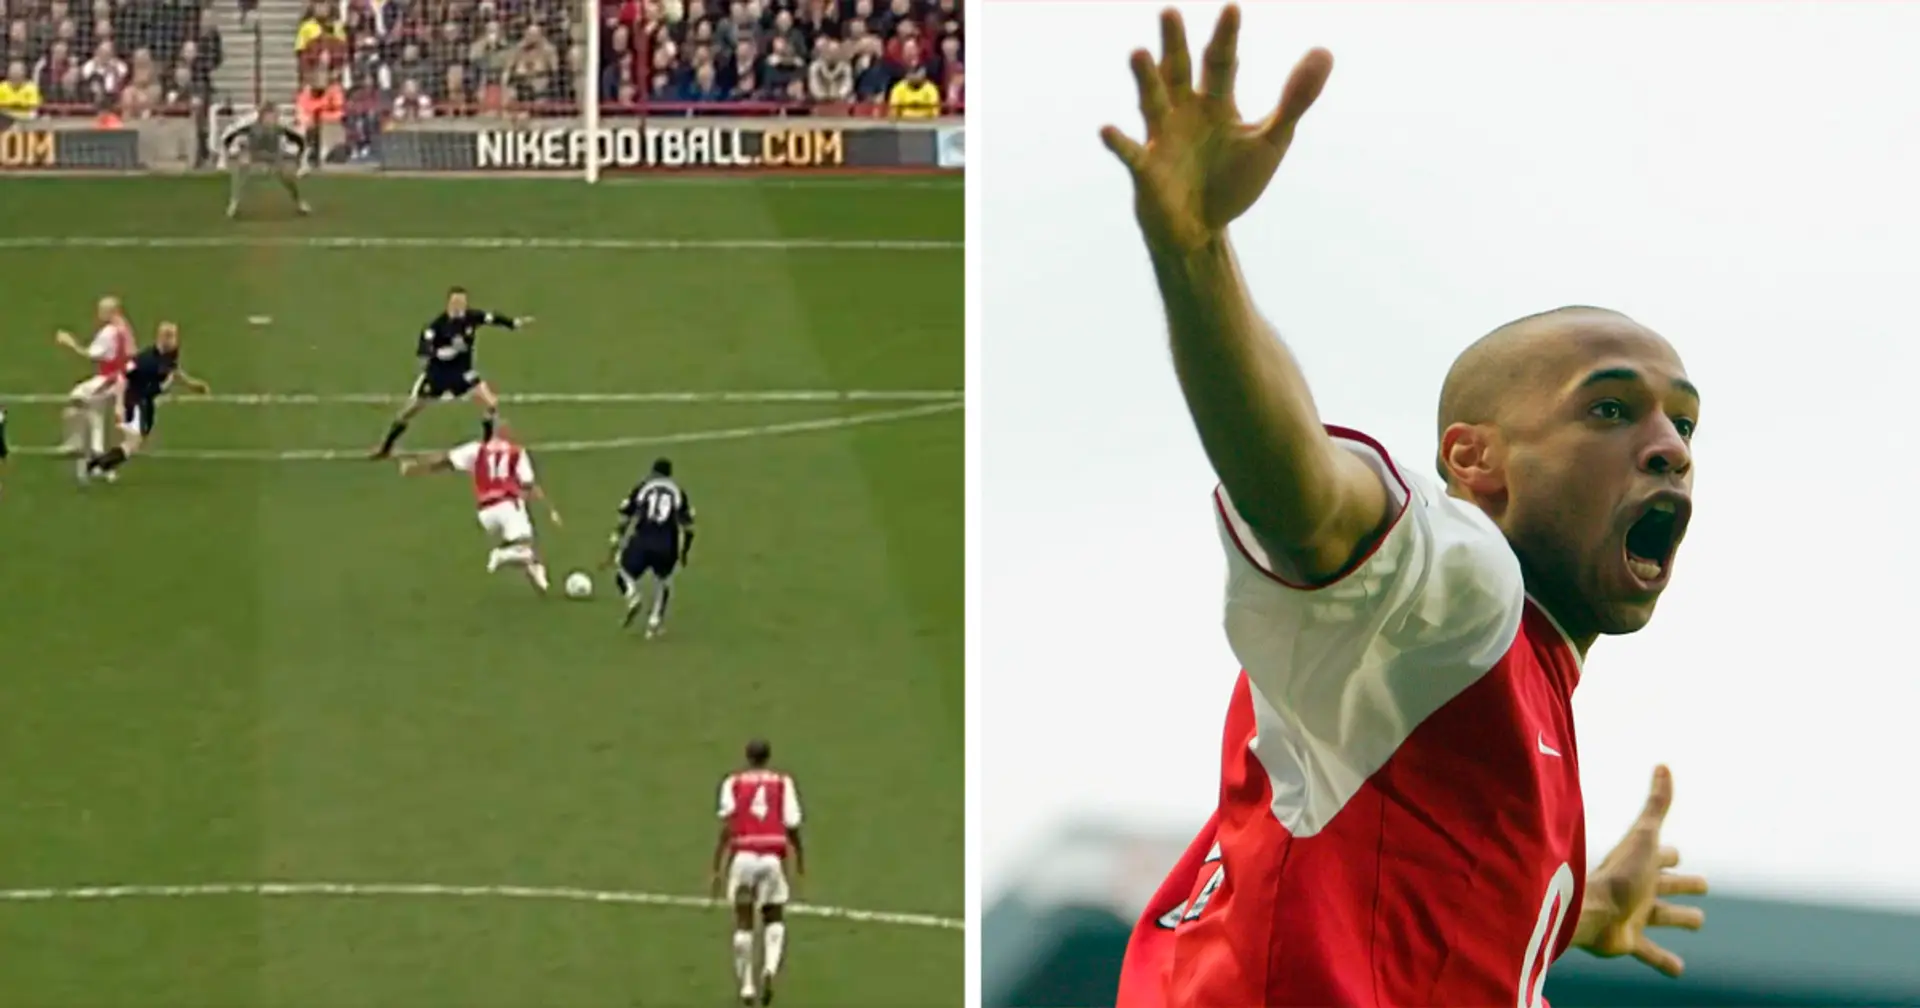 On this day 20 years ago, Thierry Henry scored a fantastic screamer against Man United